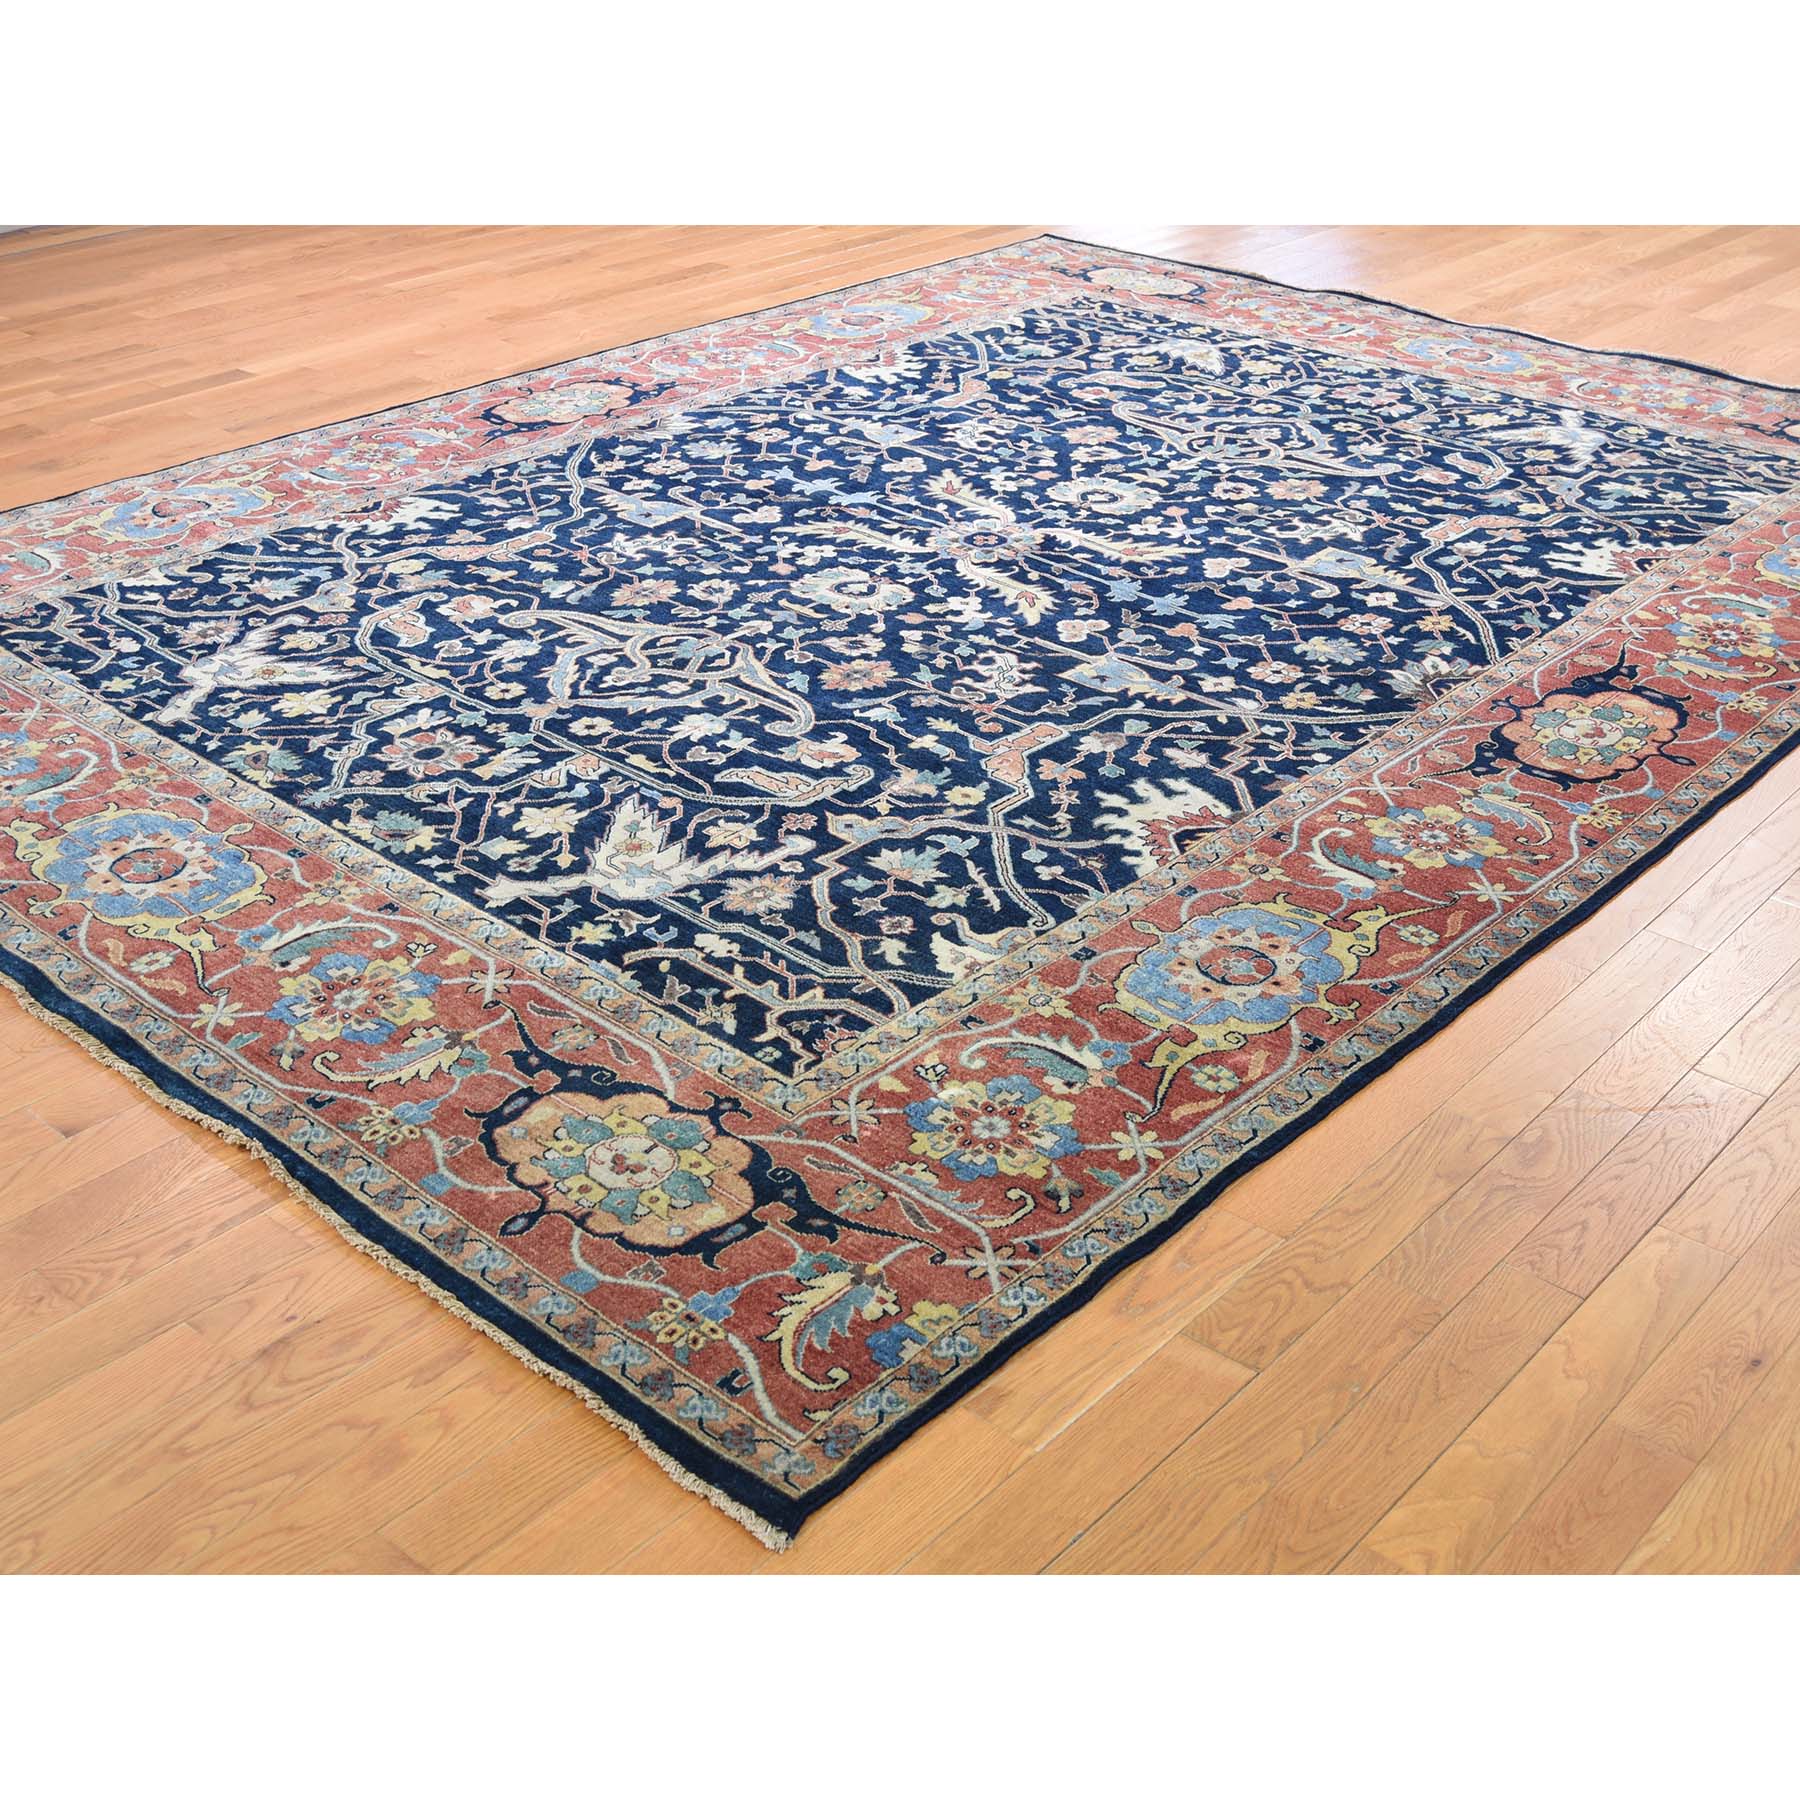 8-10 x11-10  Heriz Re-Creation All Over Design Pure Wool Hand-Knotted Oriental Rug 